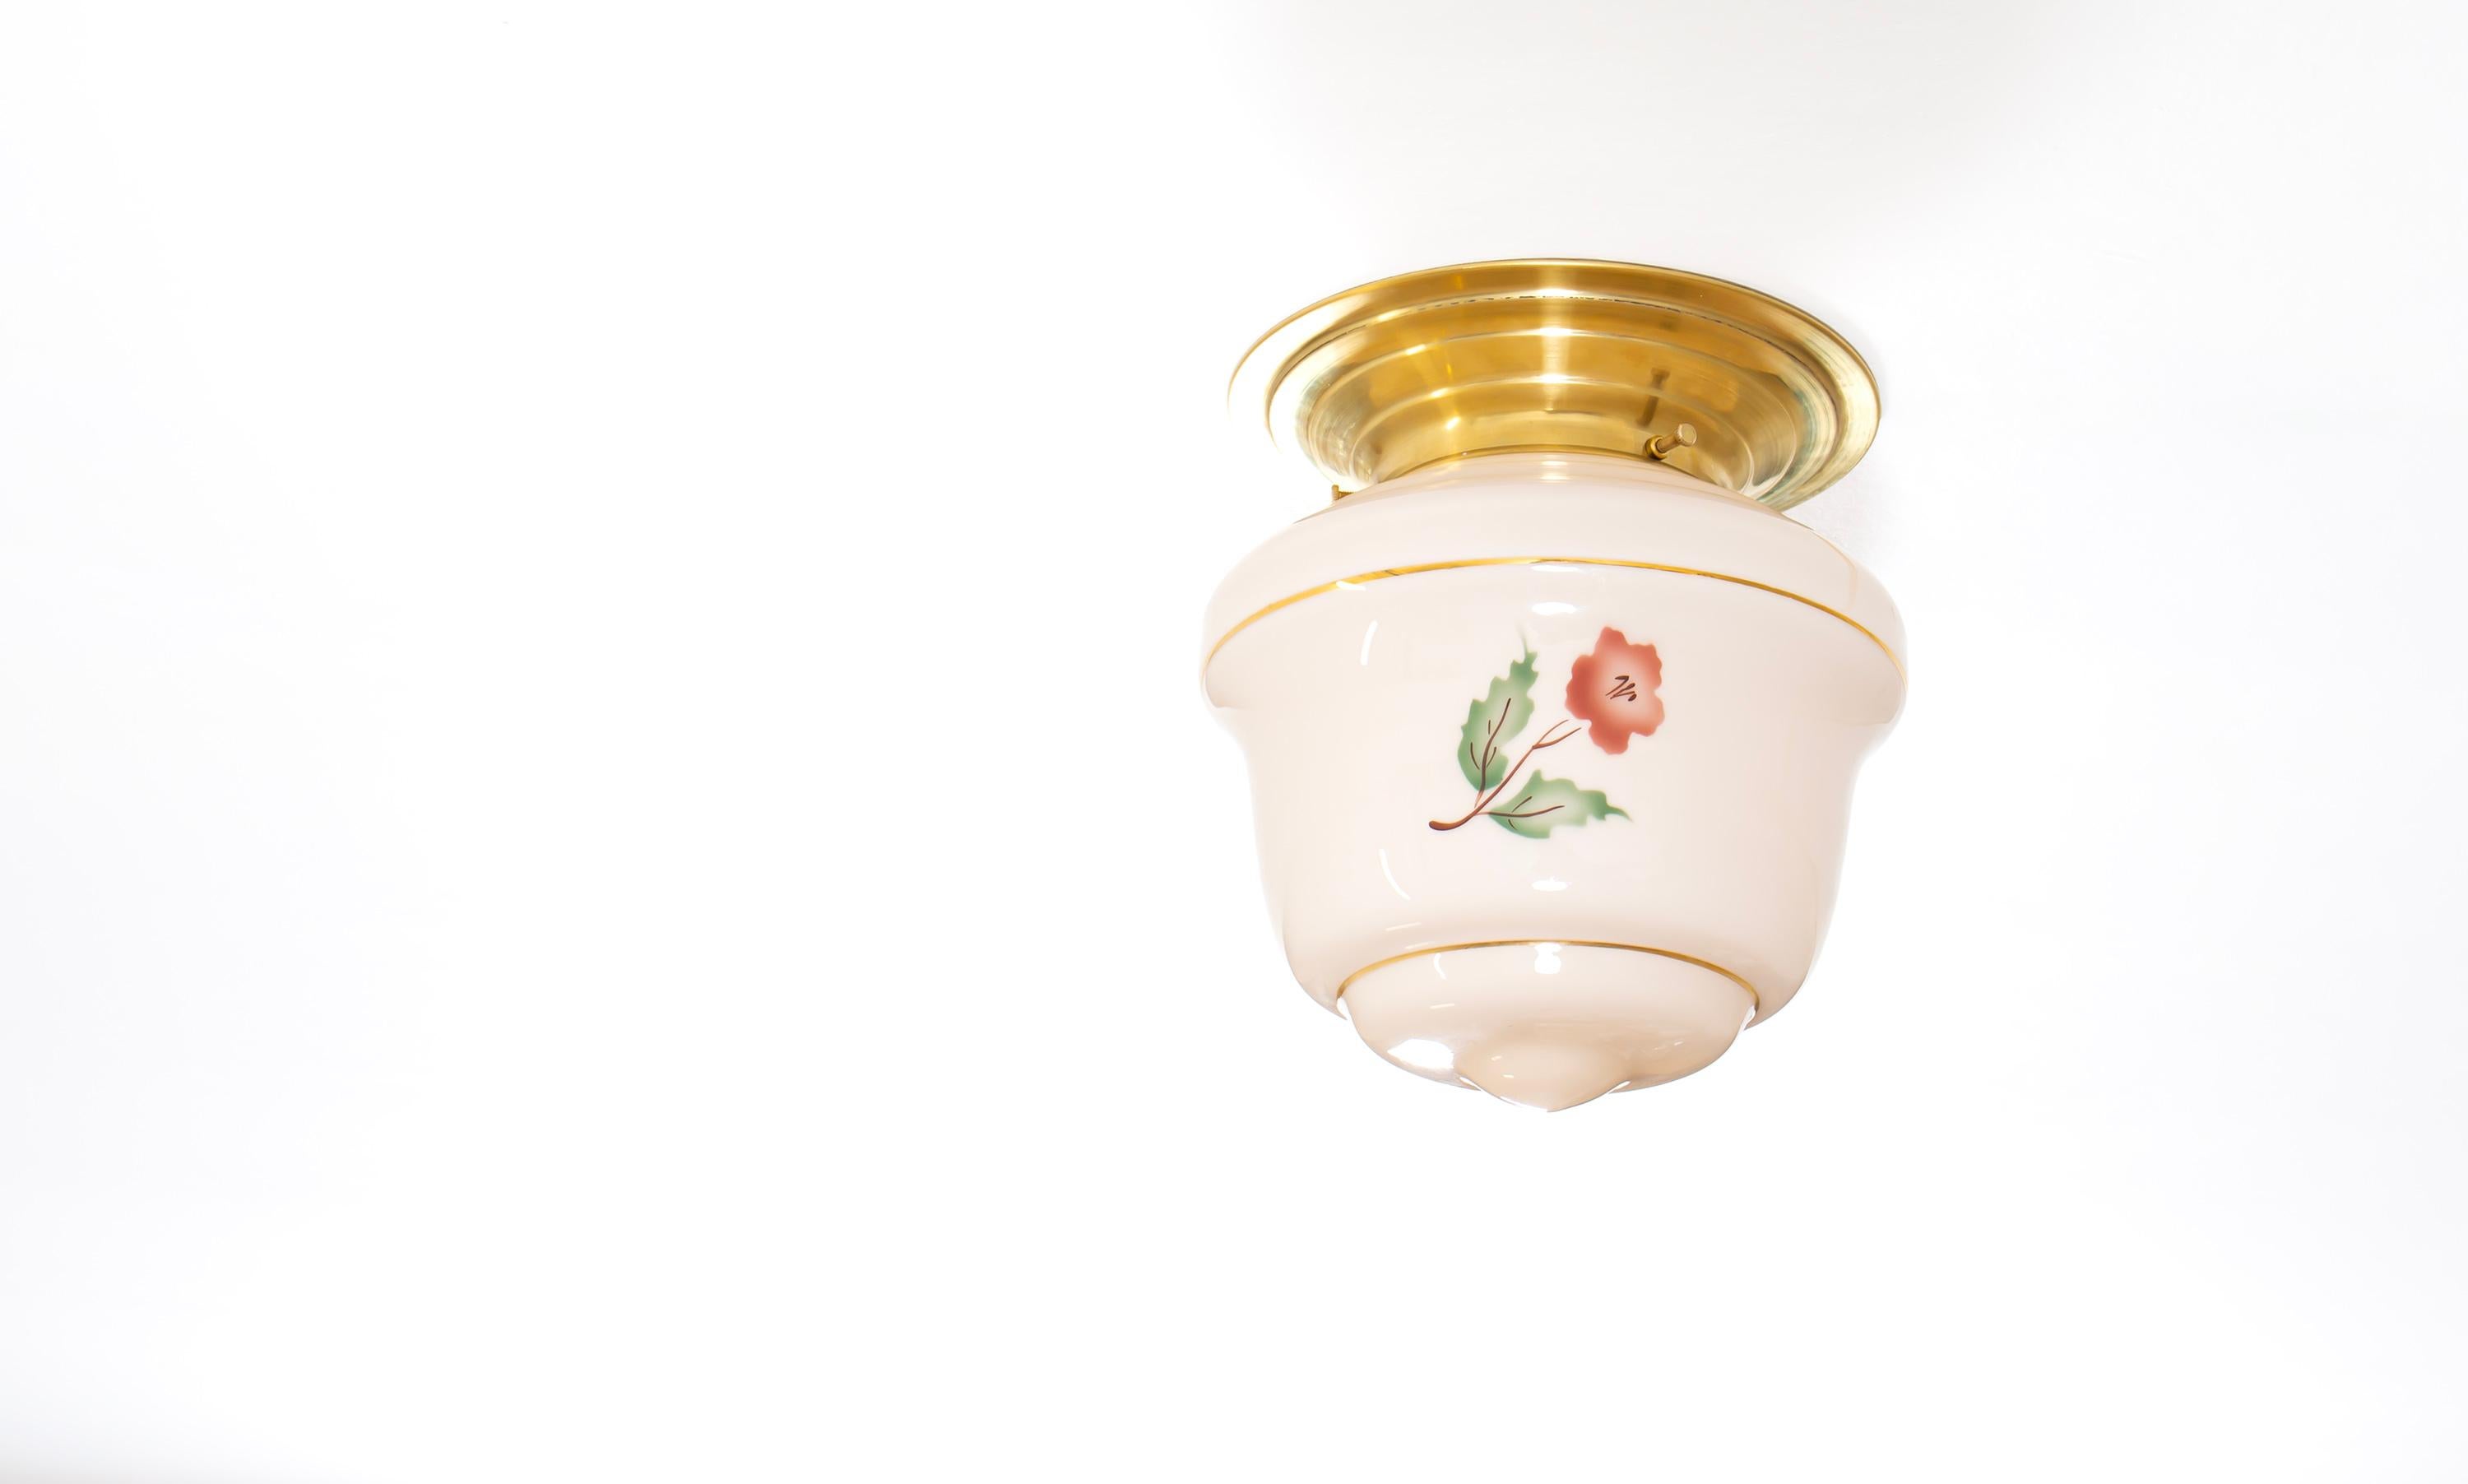 Wonderful ceiling light with hand-decorated glass shade and brass metal base. Designed and made in Norway from ca 1950s first half. The lamp is fully working and in good vintage condition. It is fitted with one E27 bulb holder (works in the US) and